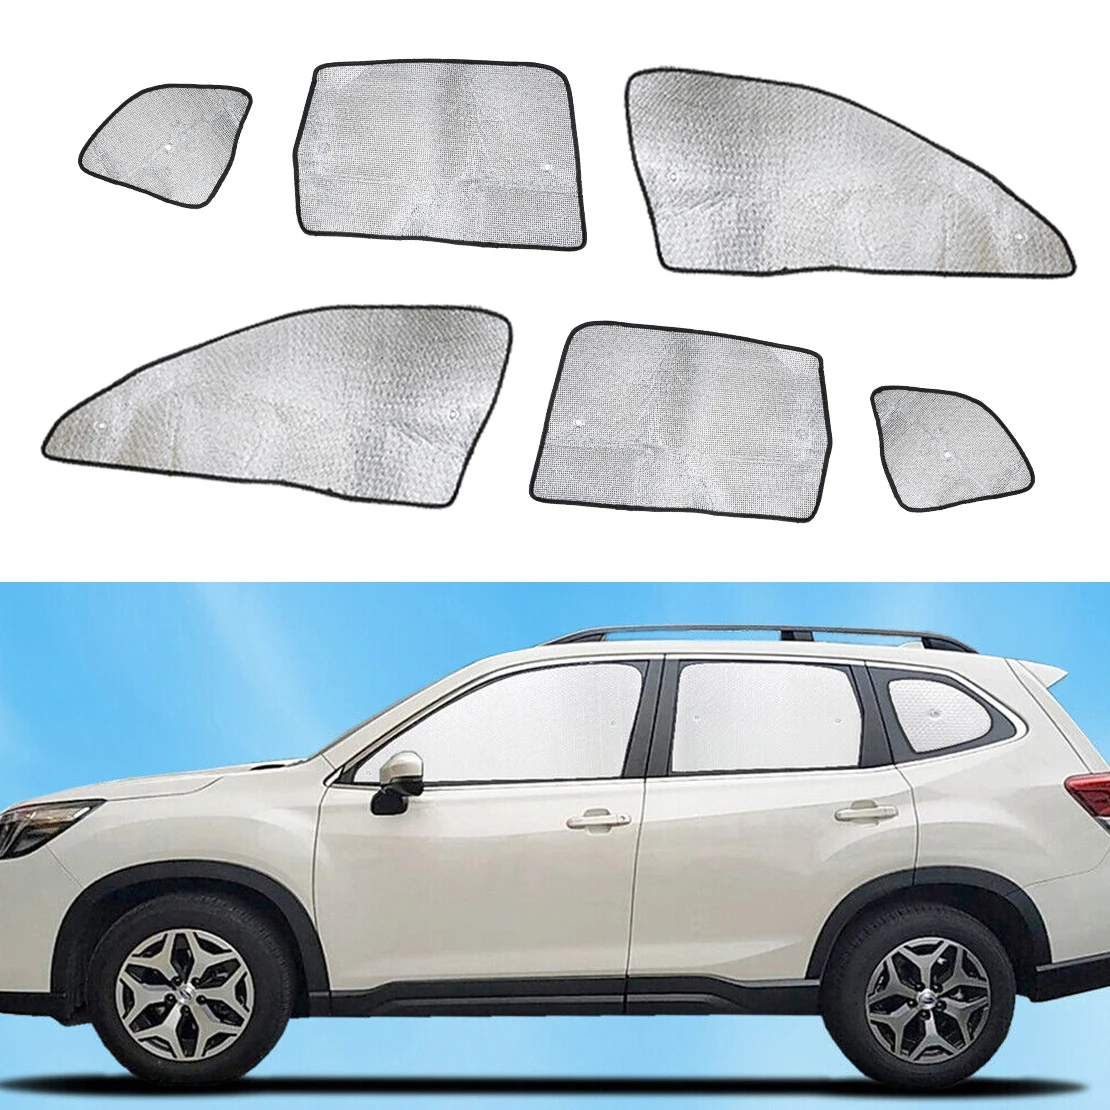 

Silver Side Window Privacy Sunshade UV Block Kit Aluminum Foil Fit for Subaru Forester 2019 2020 2021